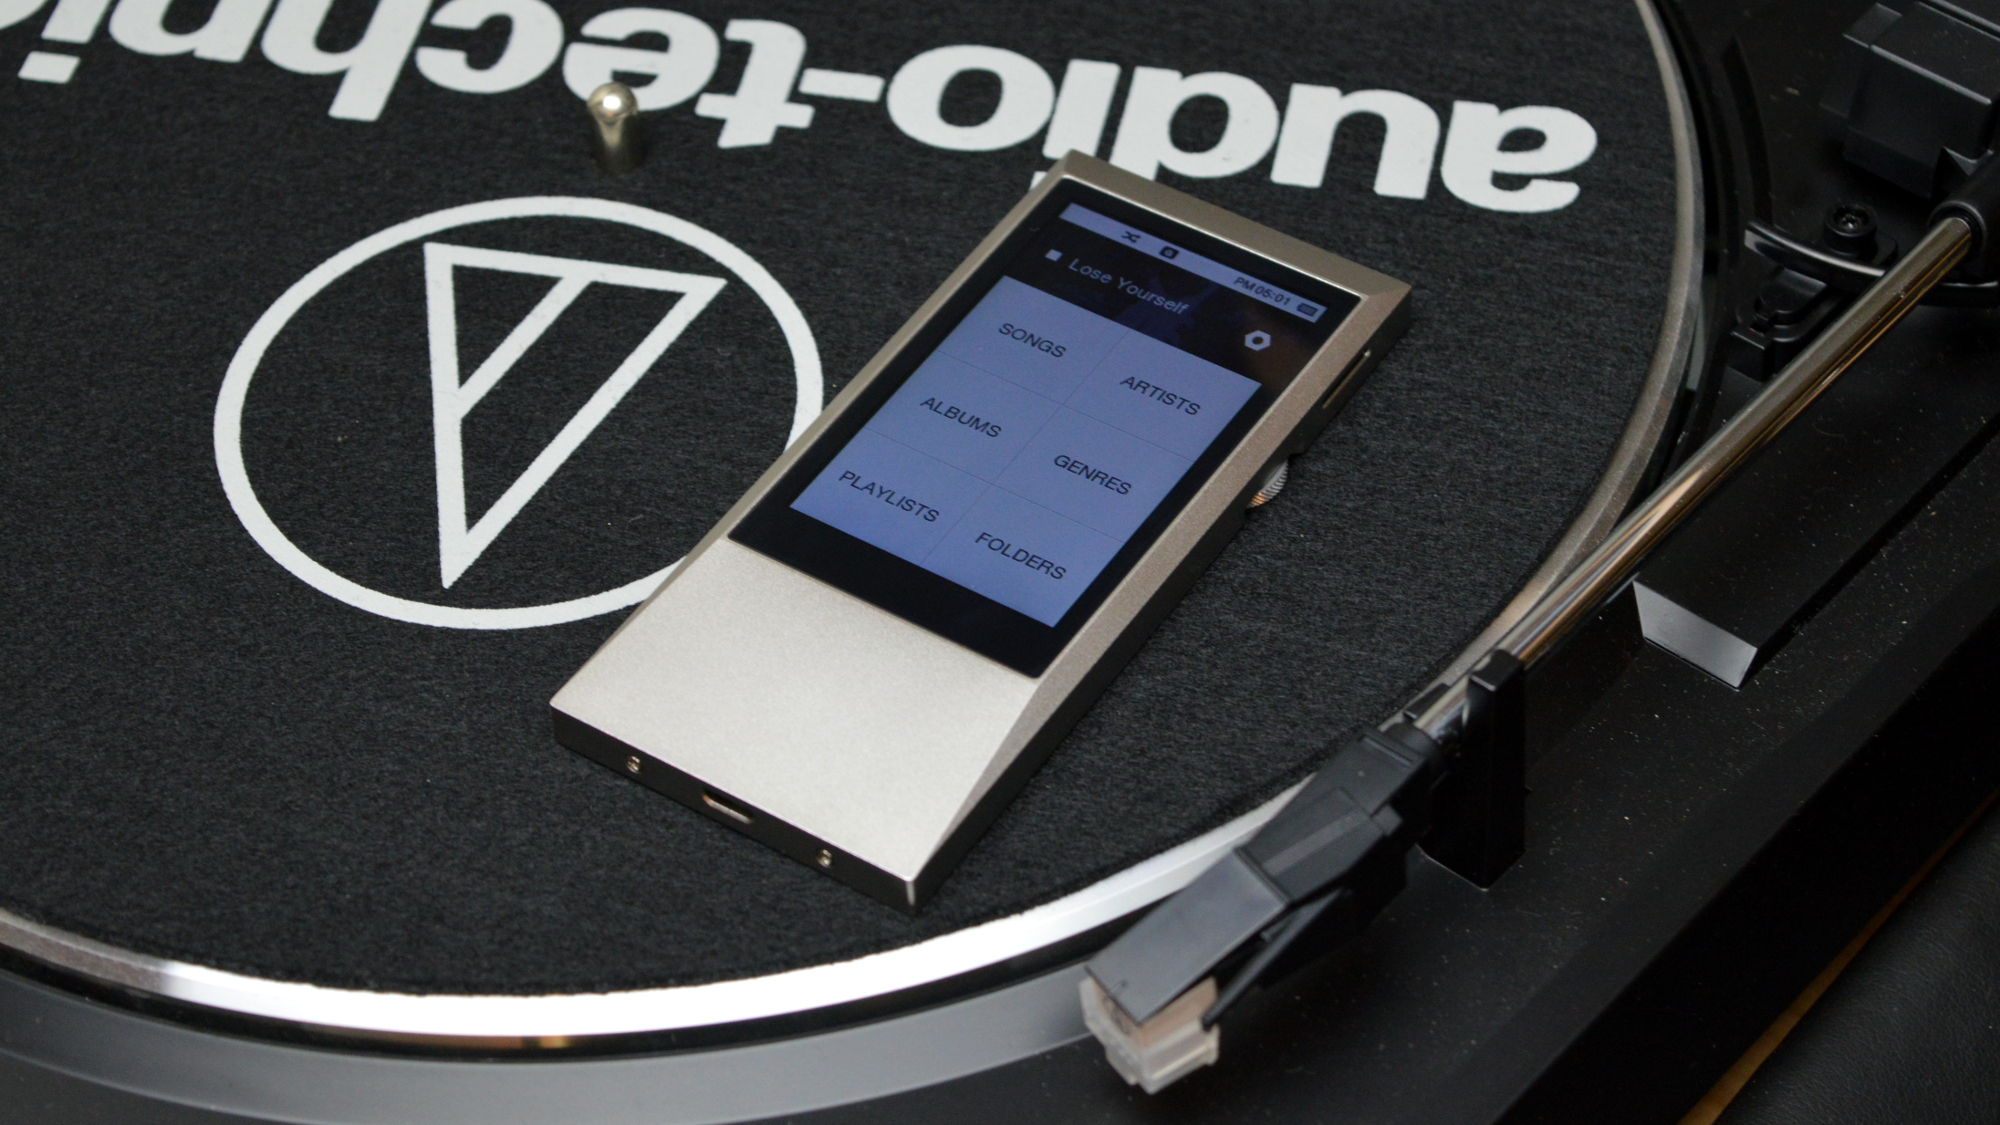 Best MP3 Players: TechRadar's guide to the best portable music players